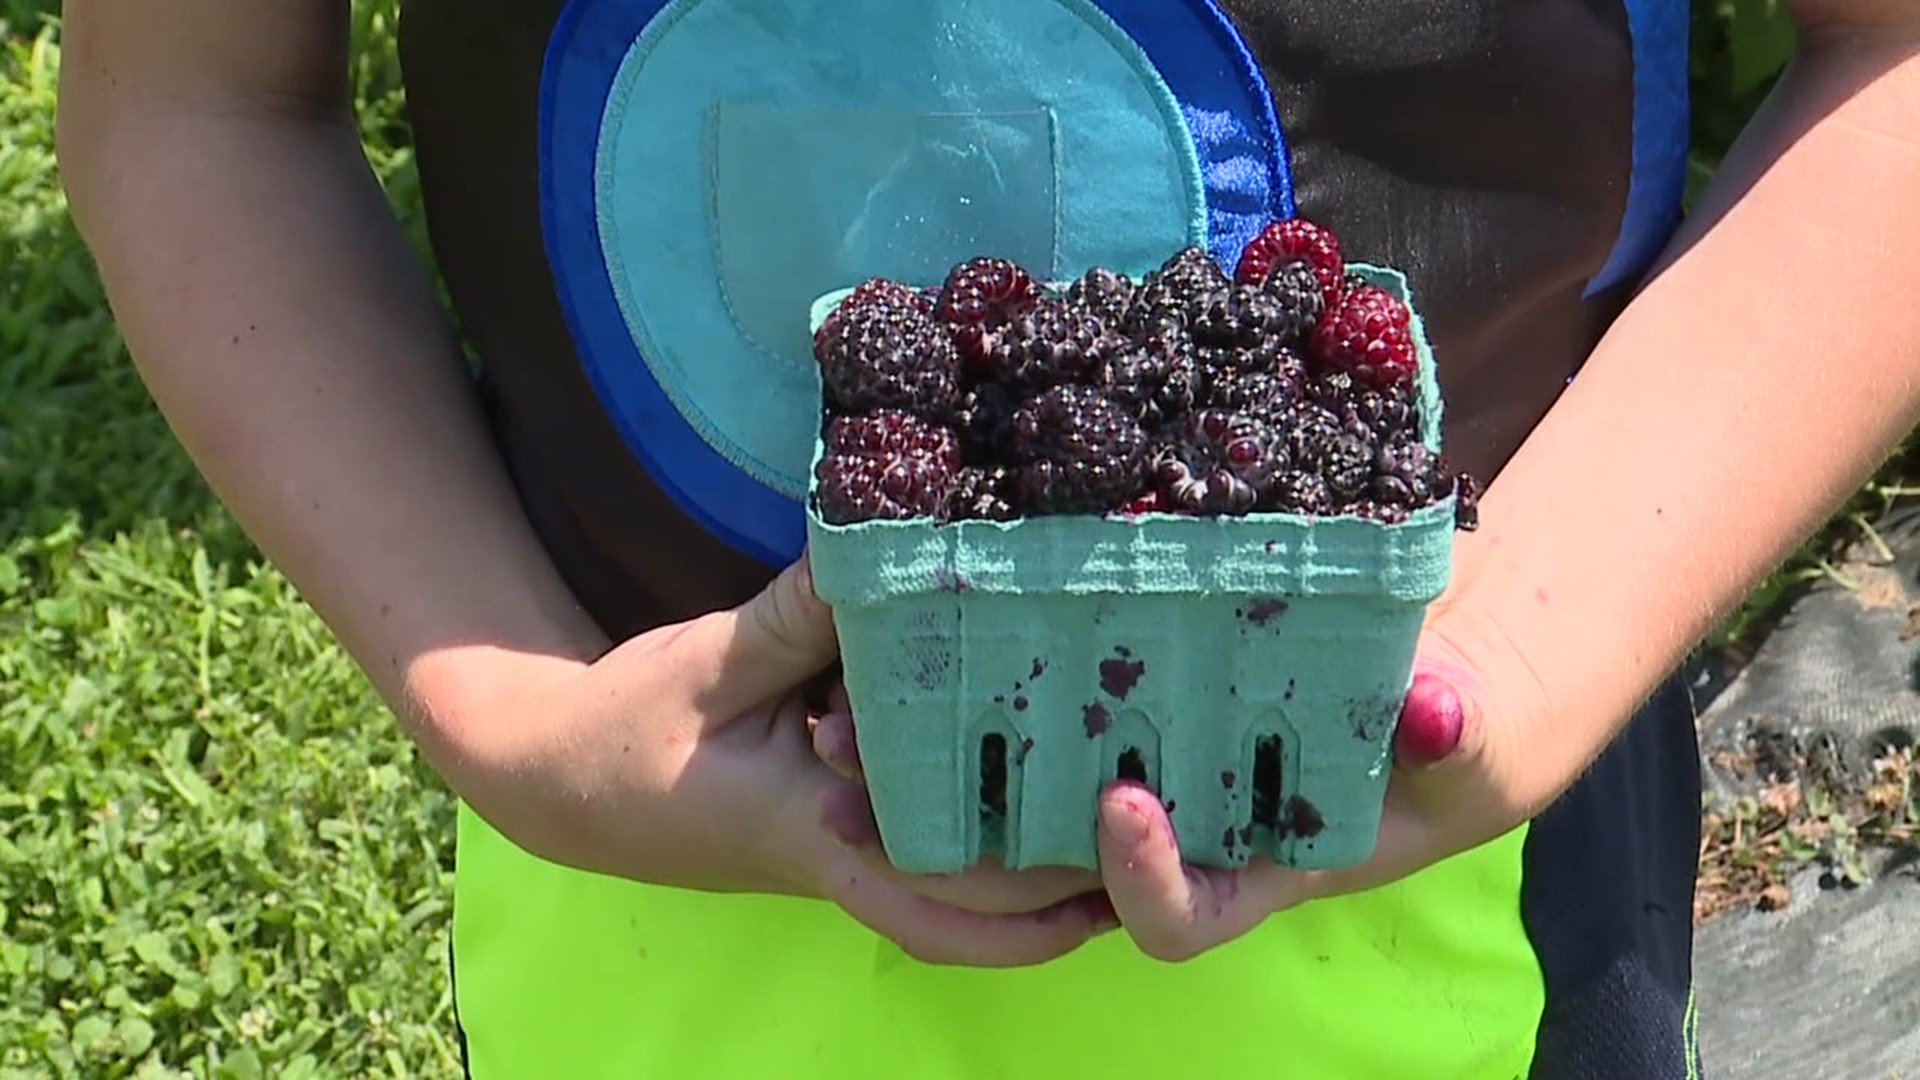 Berry season is in full swing and runs through the end of July in central Pennsylvania.